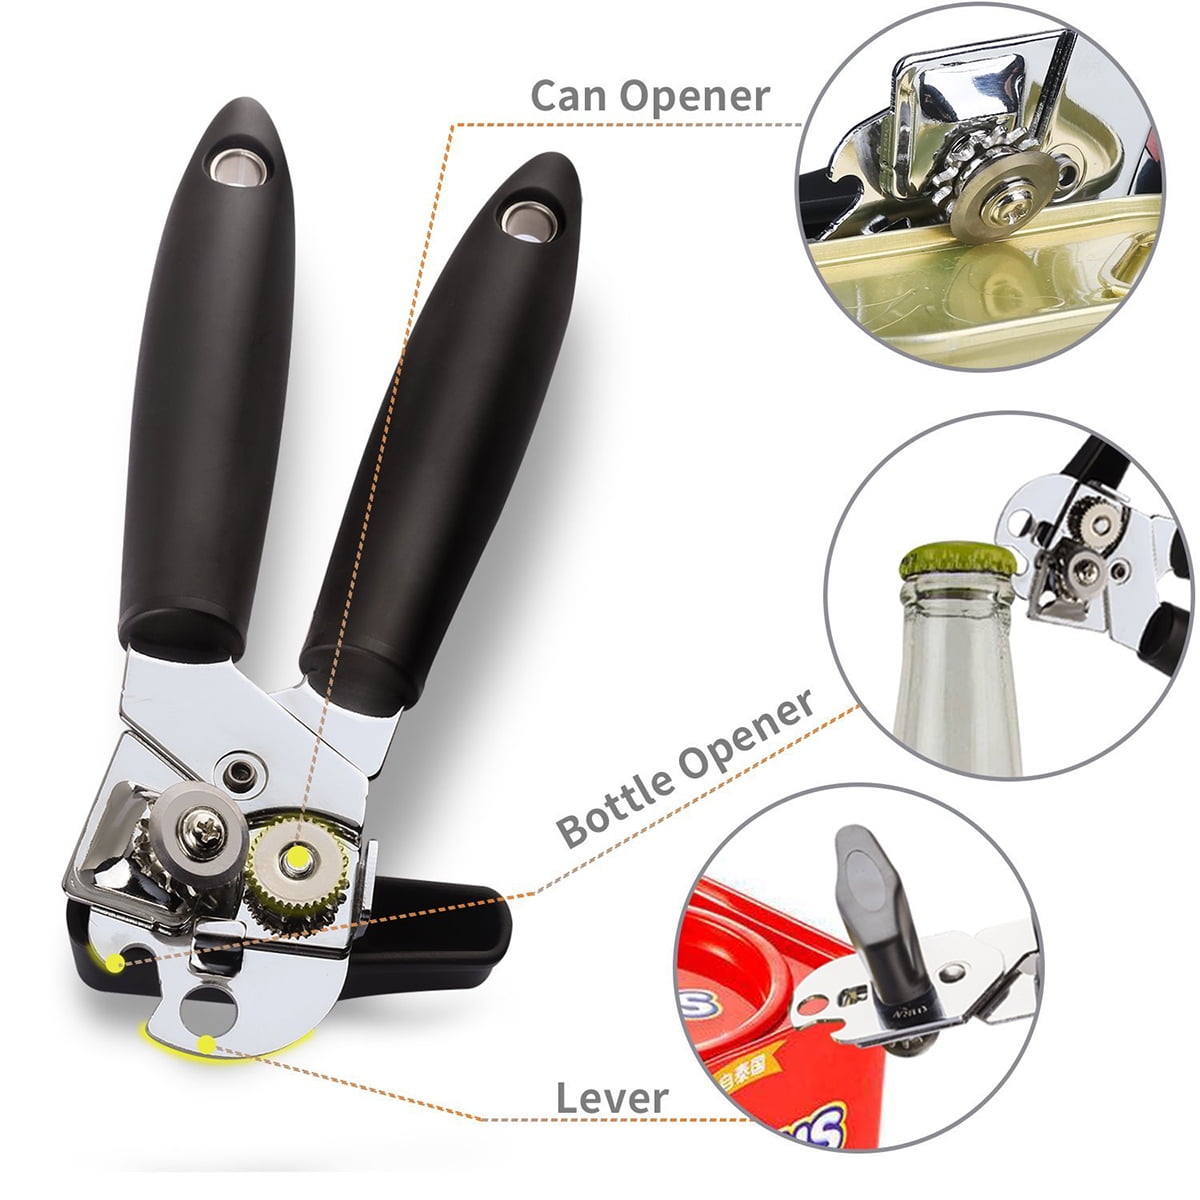 Leifheit Stainless Steel Safety Pro Single Handle Can Opener Black and Silver